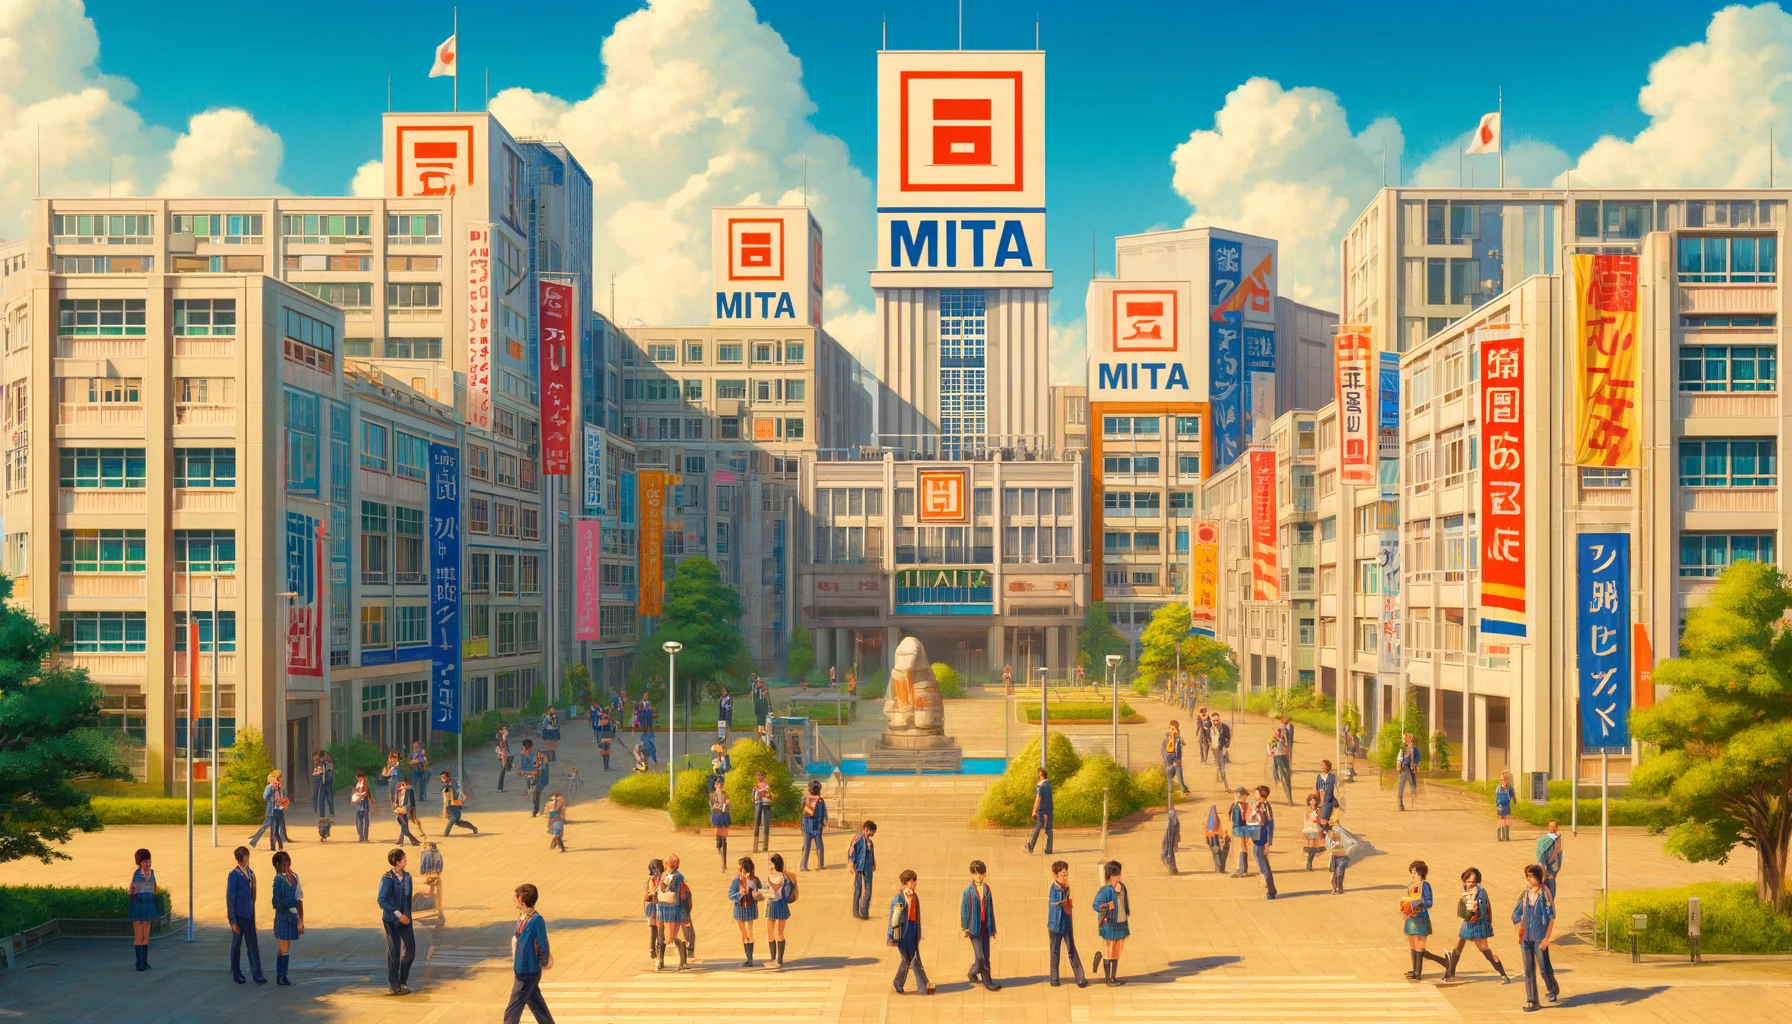 A vibrant high school campus scene at Mita High School, Japan, featuring the word 'Mita' prominently displayed across various elements of the image. This includes the sky, building facades, and on flags carried by students. The campus is bustling with diverse groups of Asian students, all wearing colorful school uniforms and engaged in a variety of activities like sports, studying, and social interactions. The architecture combines modern with traditional elements, and the grounds are lush with greenery and seasonal flowers, creating a lively, dynamic educational atmosphere.